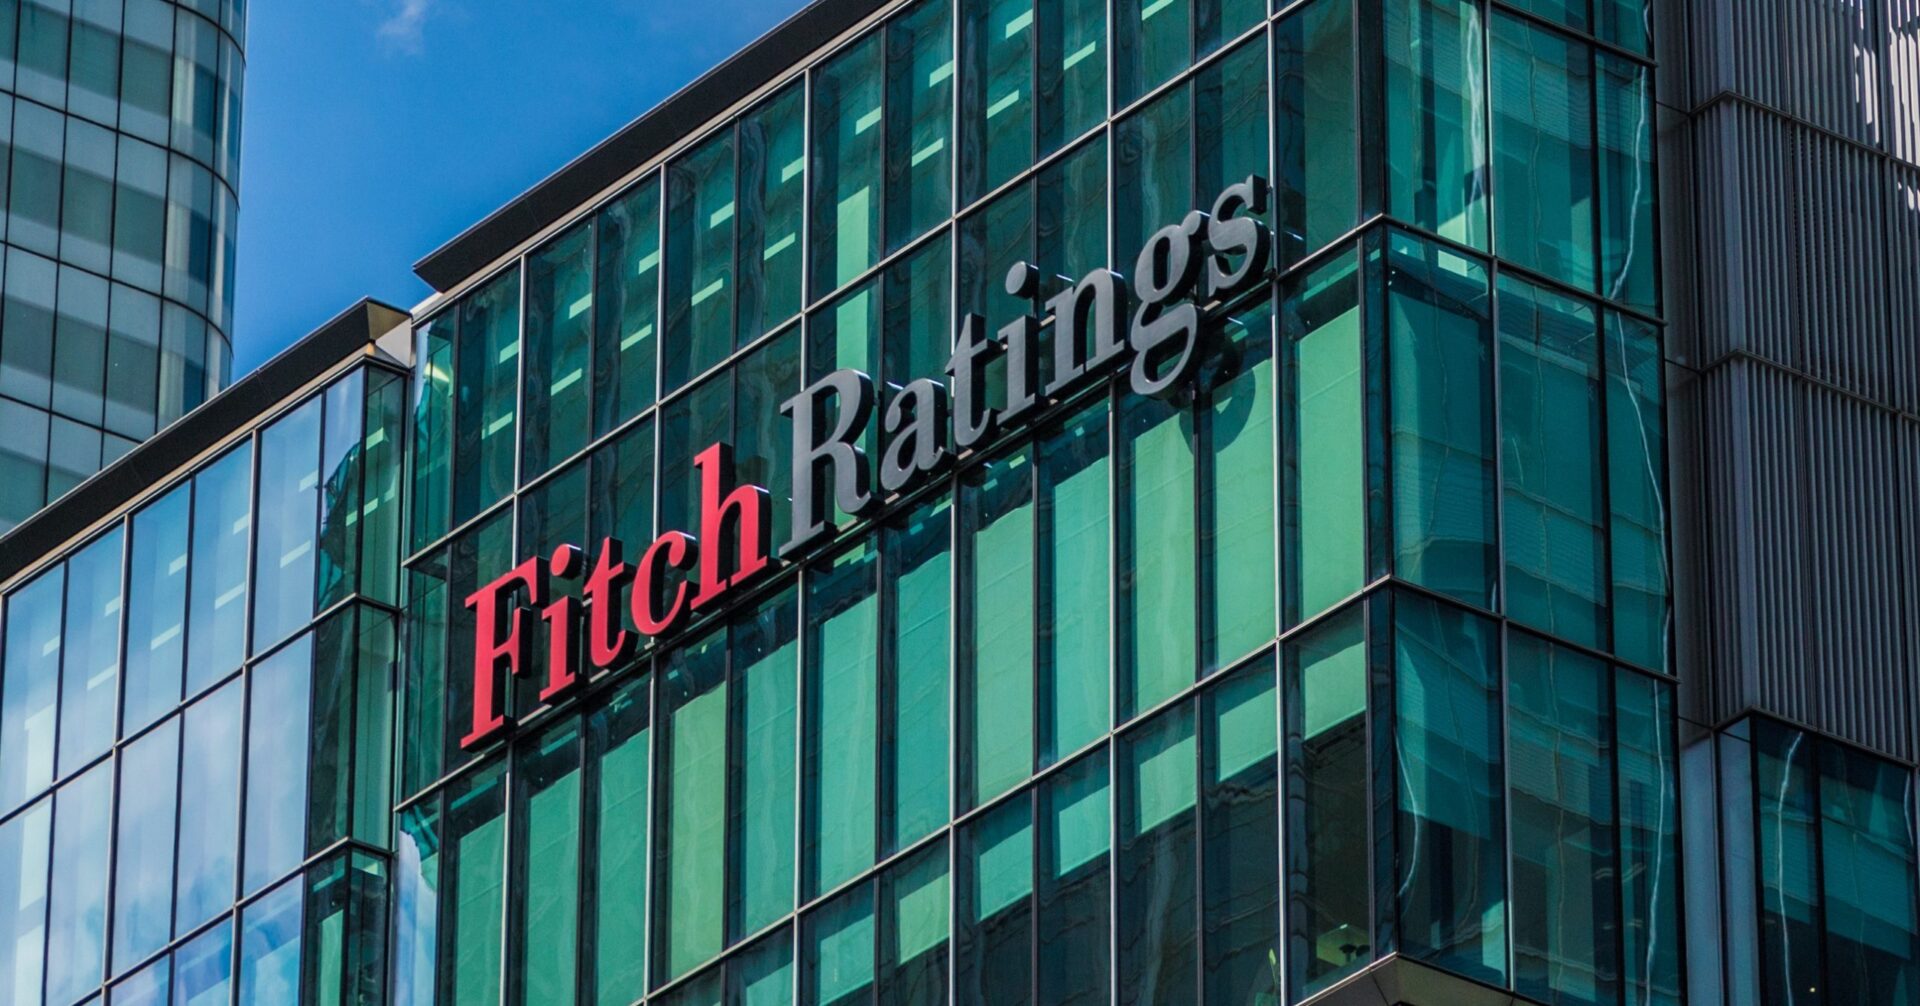 Fitch Downgrade, Economic Highs Push Rates Up